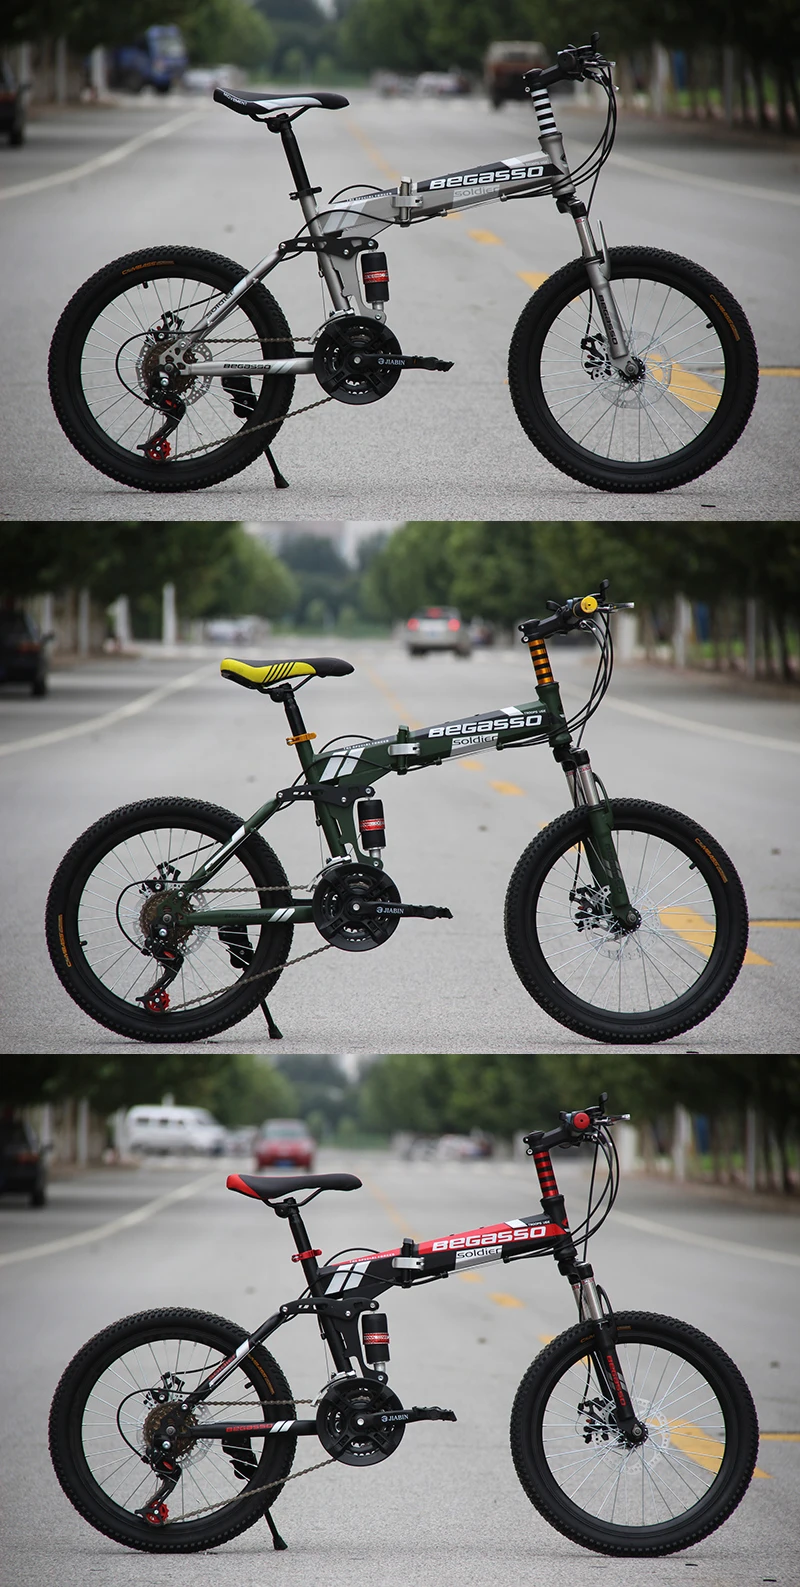 begasso soldier bicycle